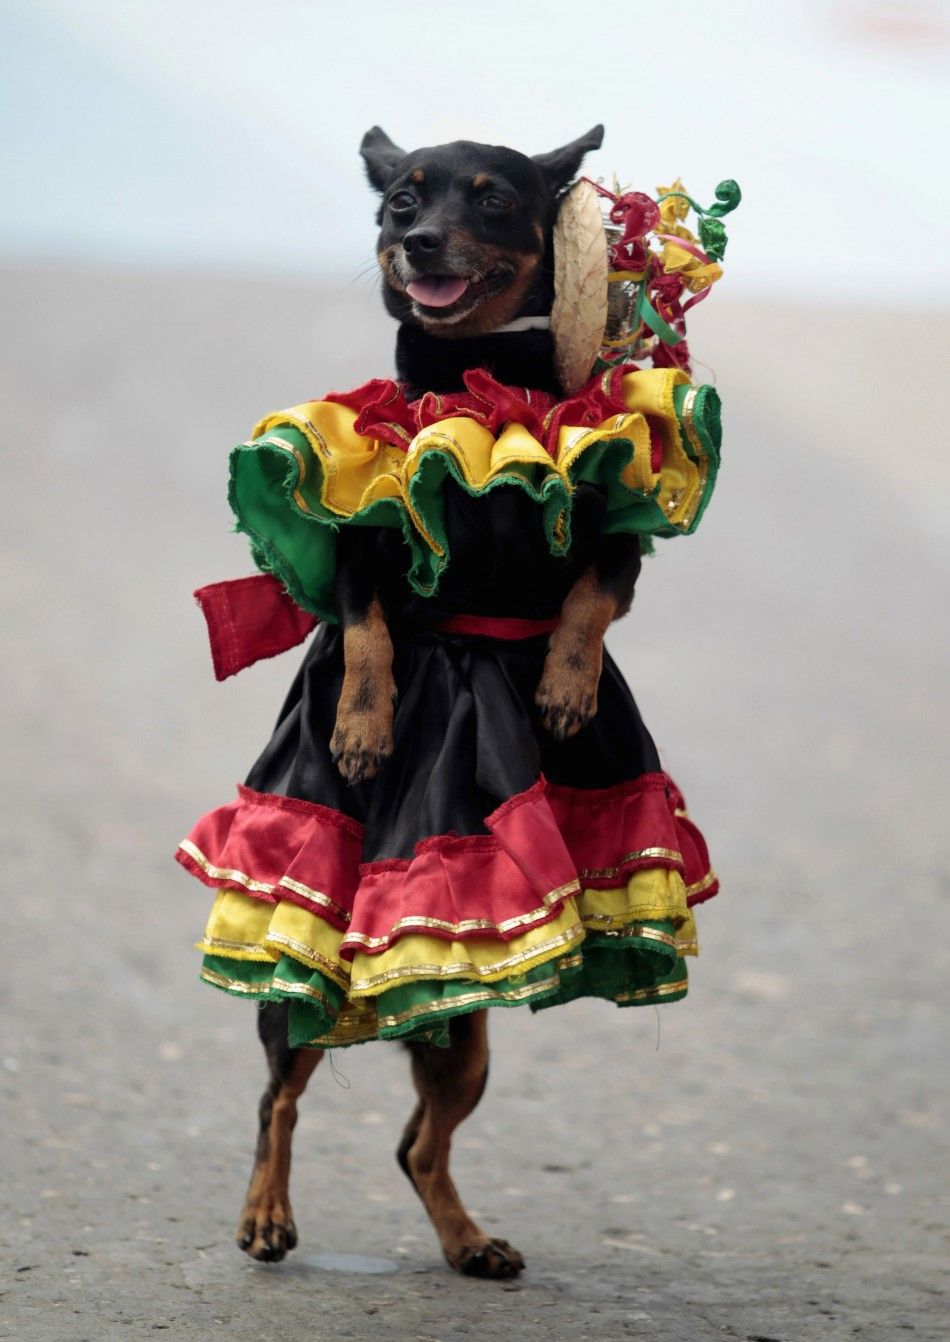 A dog dressed as a Cumbia dancer performs during a parade at the Barranquillas carnival in Colombia